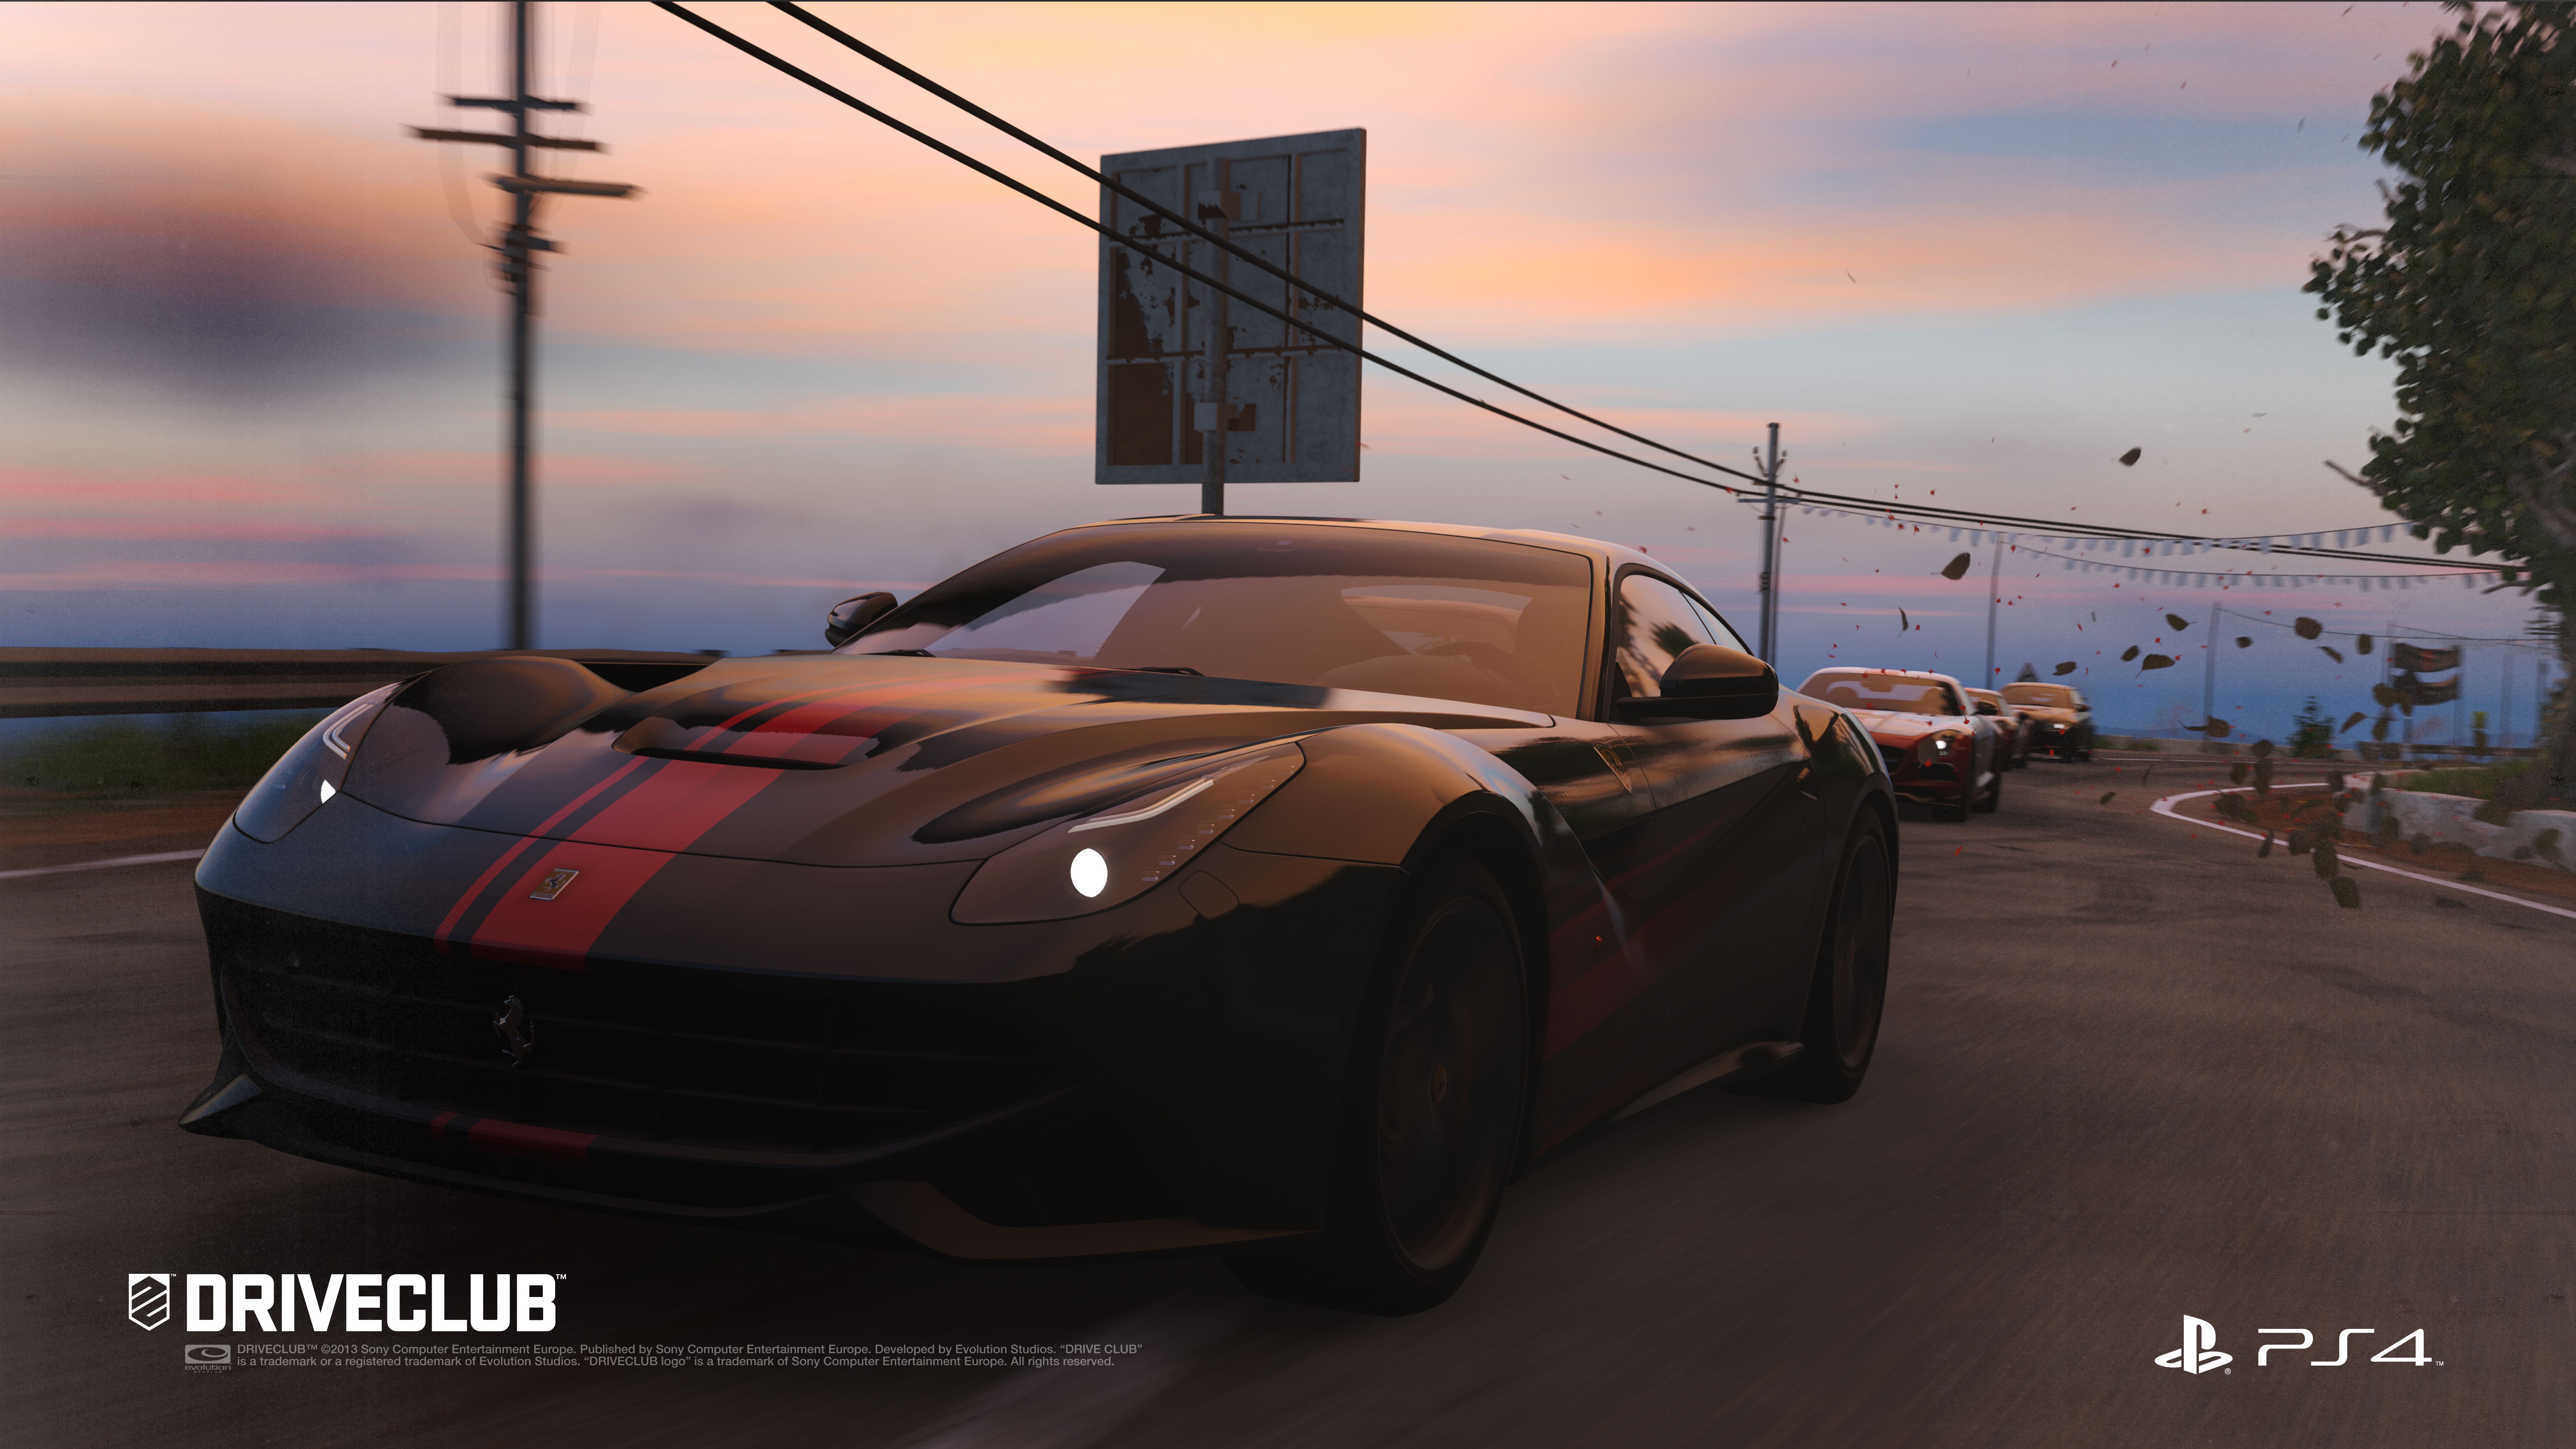 driveclub review image 1